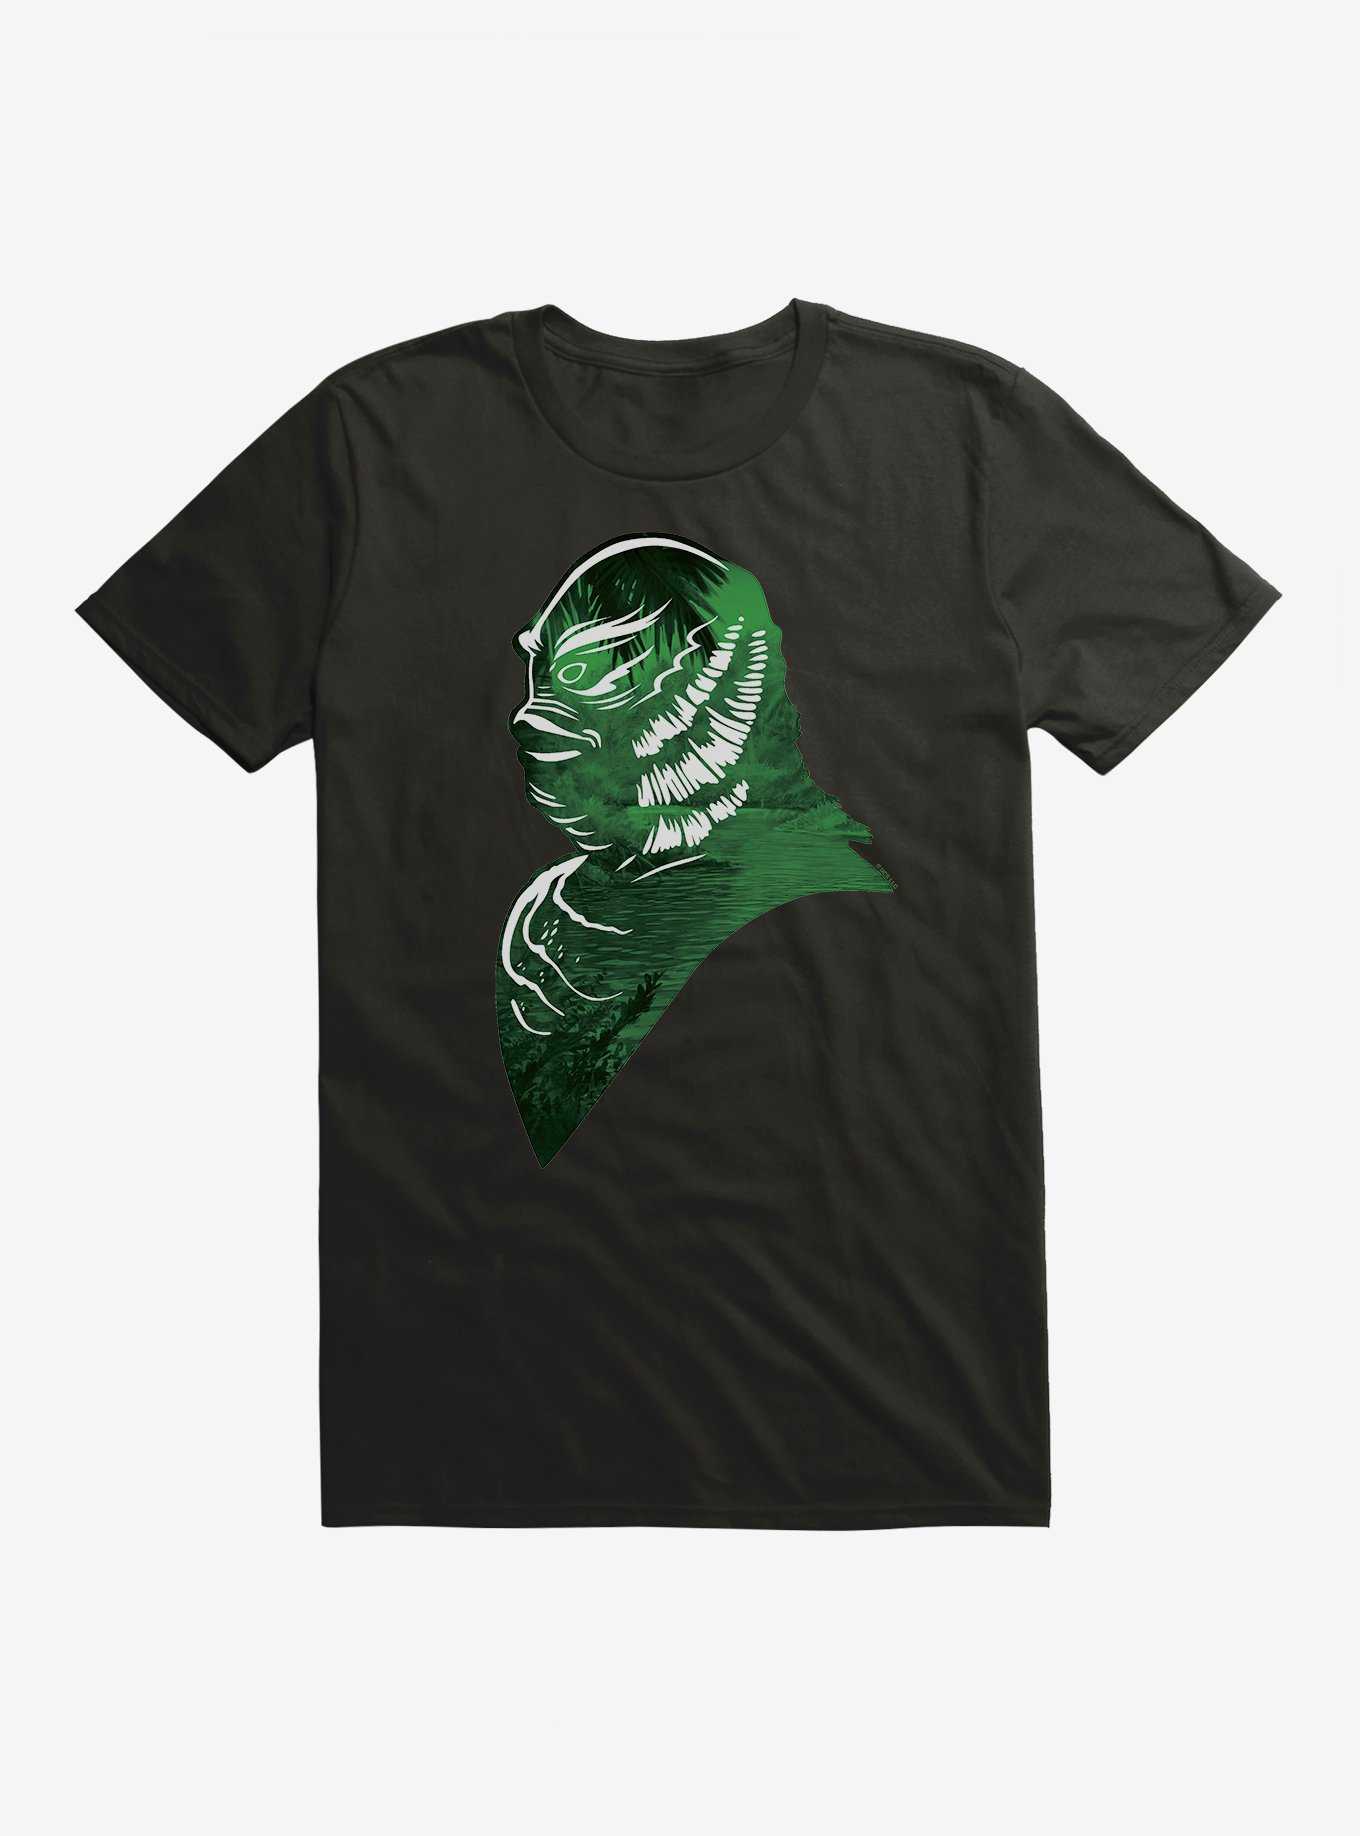 Universal Monsters Creature From The Black Lagoon Amazon Profile T-Shirt, , hi-res